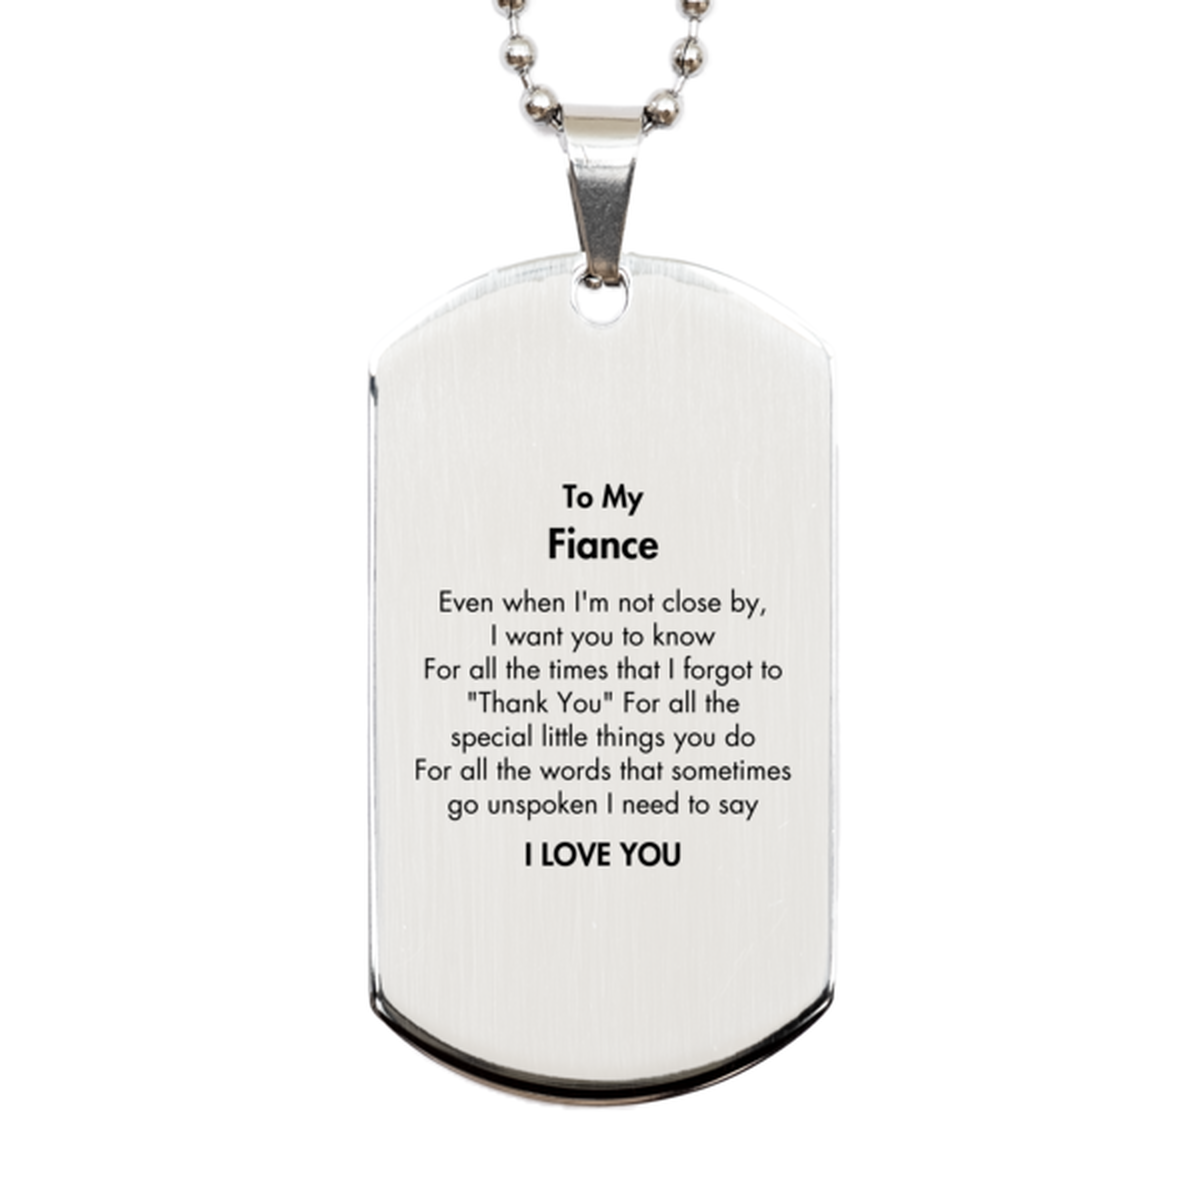 Thank You Gifts for Fiance, Keepsake Silver Dog Tag Gifts for Fiance Birthday Mother's day Father's Day Fiance For all the words That sometimes go unspoken I need to say I LOVE YOU